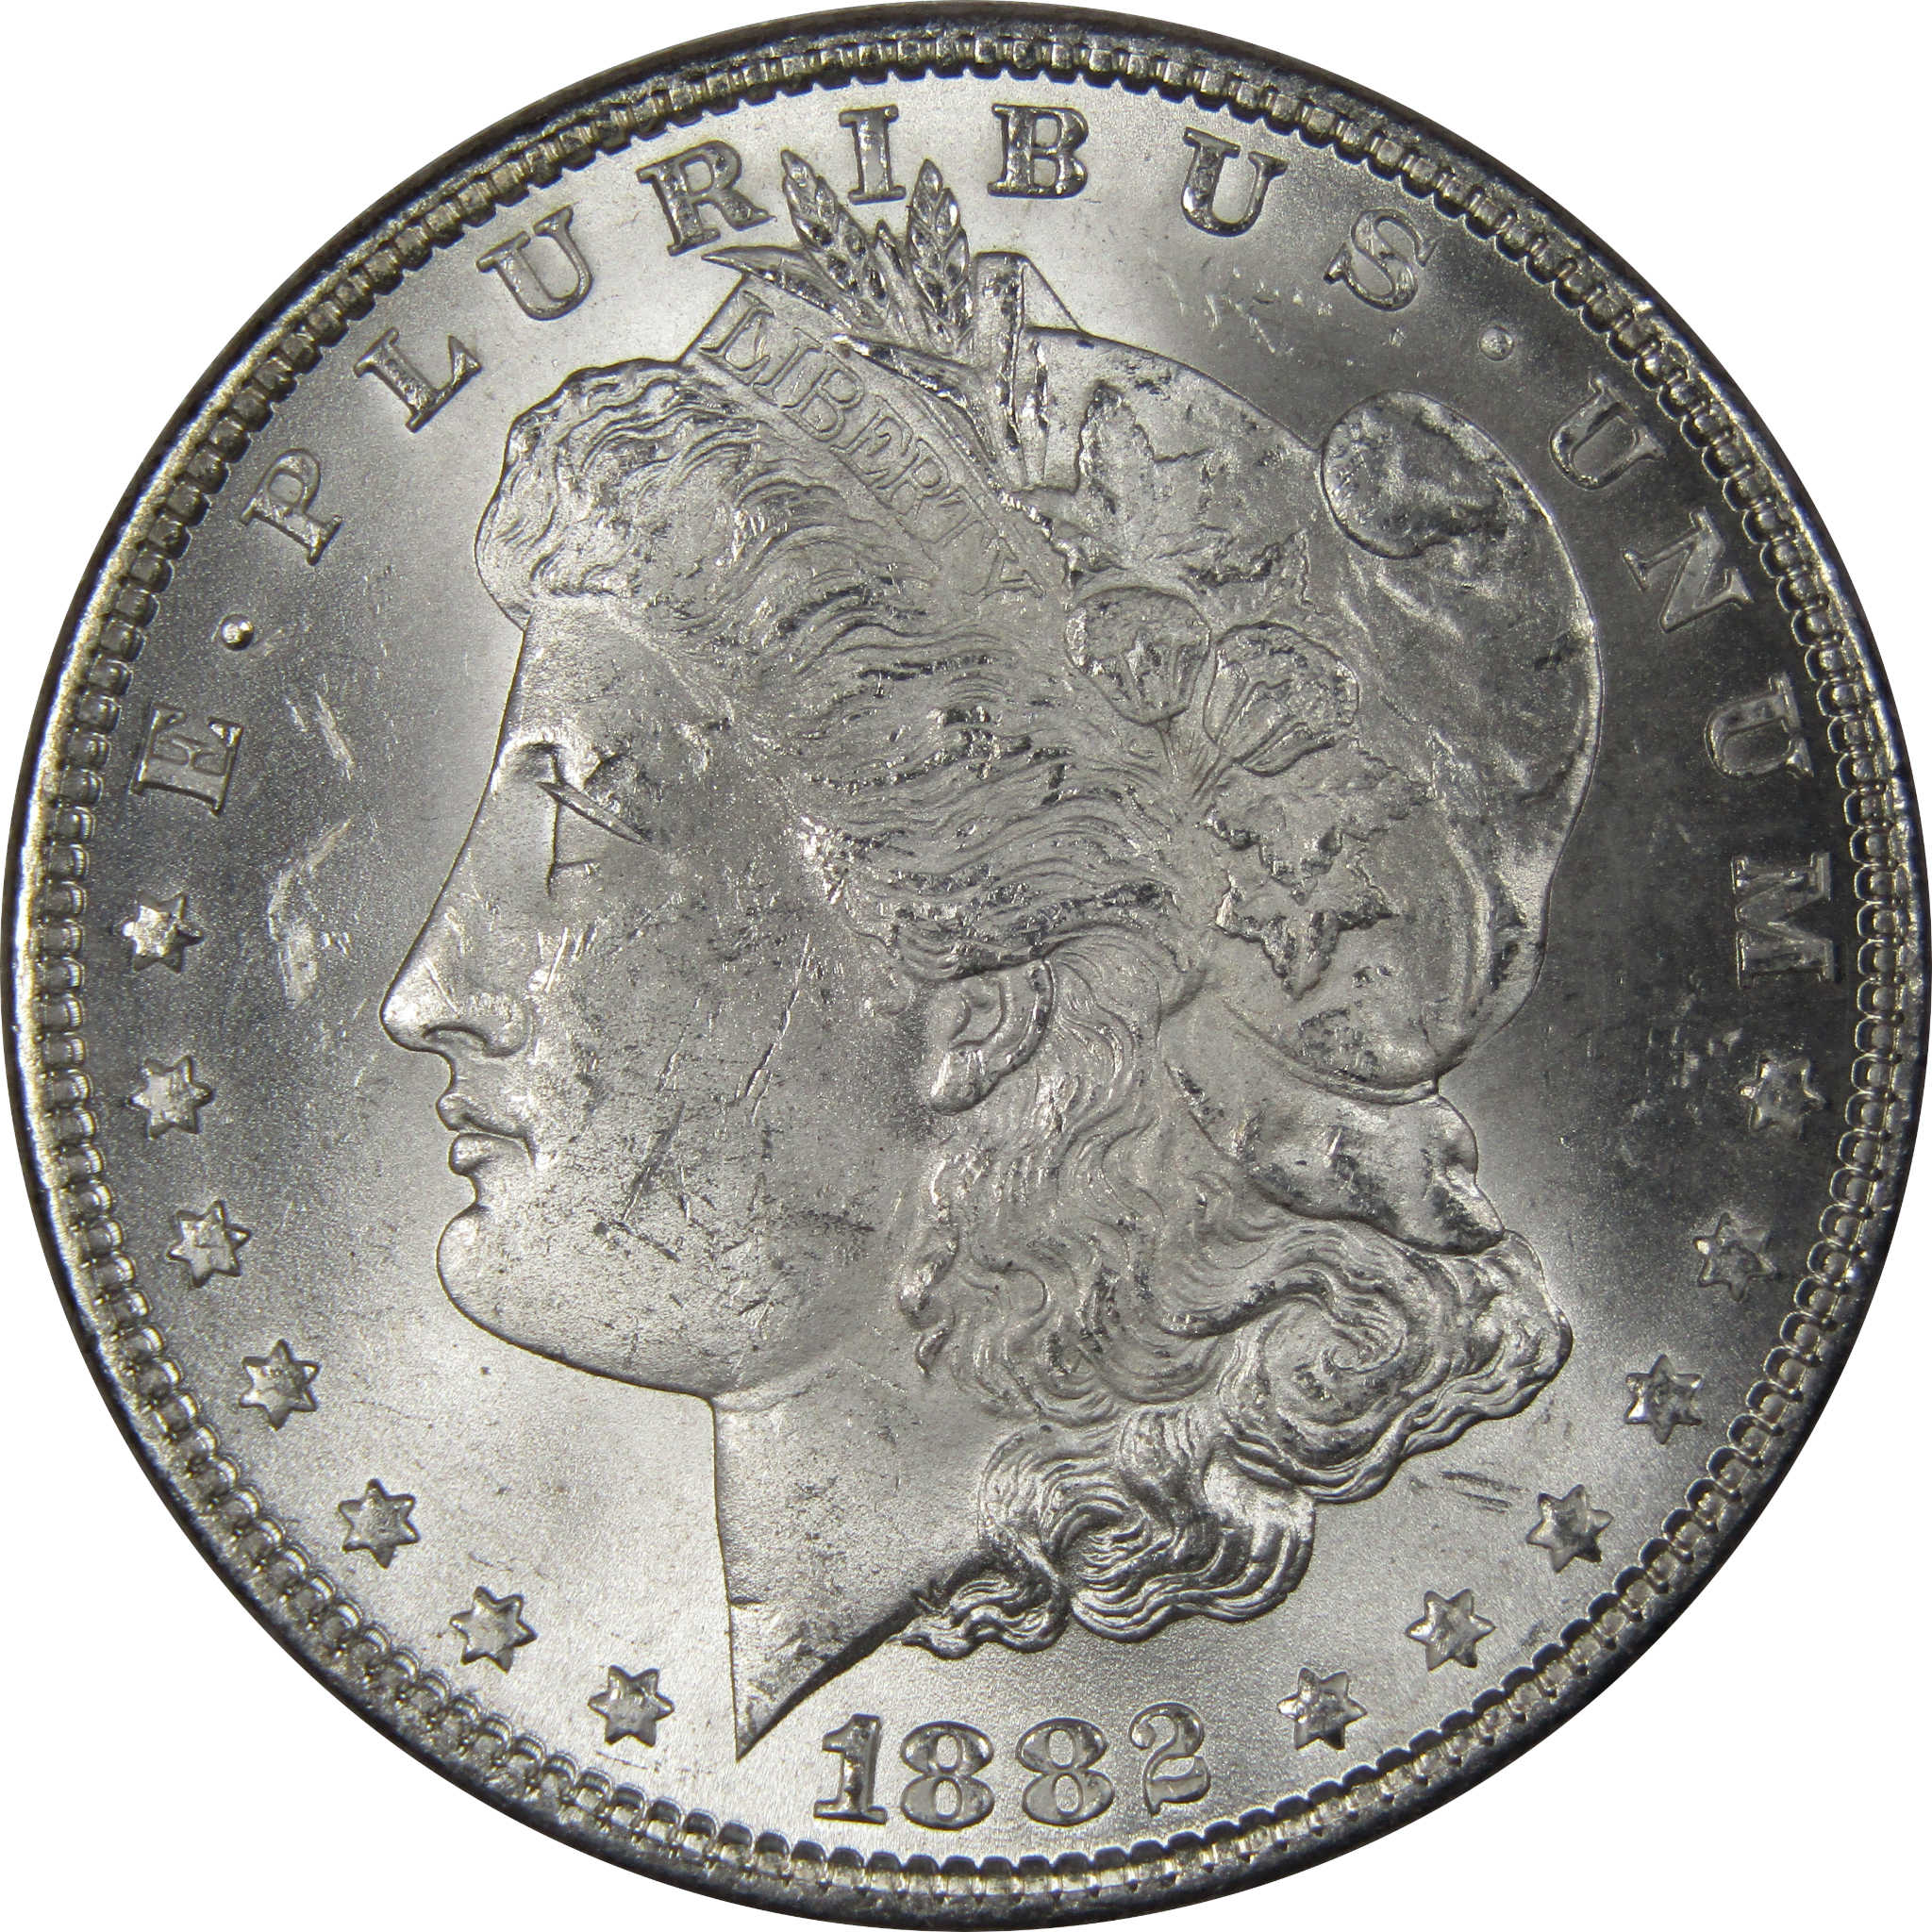 1882 Morgan Dollar BU Uncirculated Mint State 90% Silver SKU:IPC9706 - Morgan coin - Morgan silver dollar - Morgan silver dollar for sale - Profile Coins &amp; Collectibles